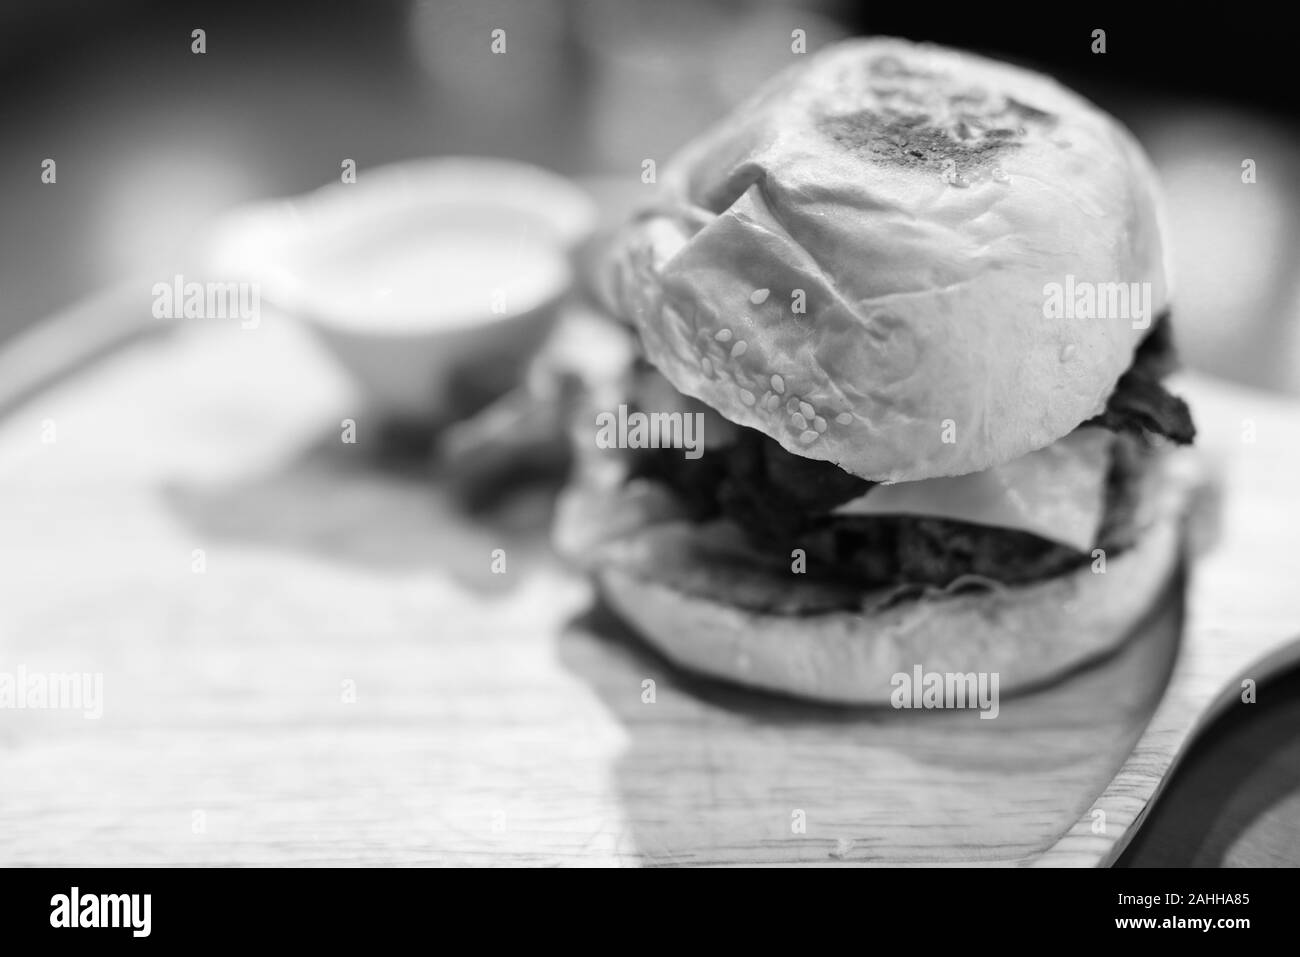 Cheeseburger Served On Wooden Table In Black And White Stock Photo